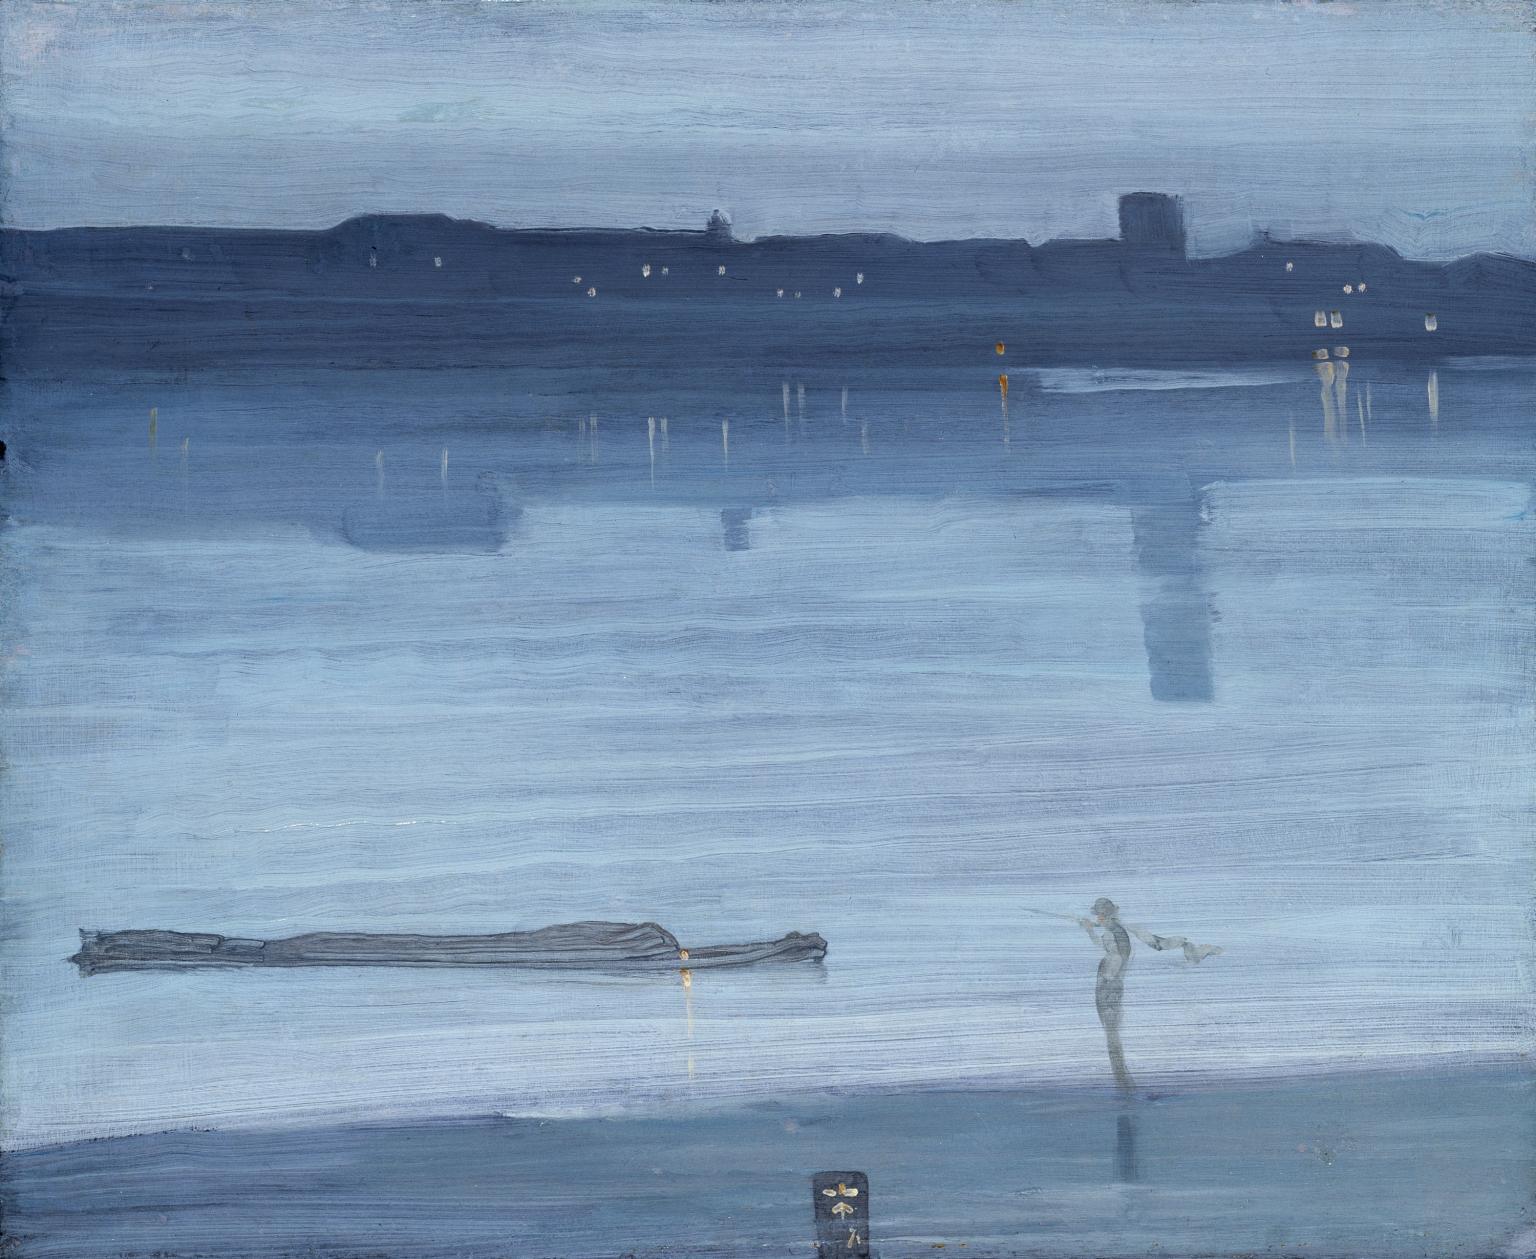 Nocturne: Blue and Silver - Chelsea 1871 by James Abbott McNeill Whistler 1834-1903